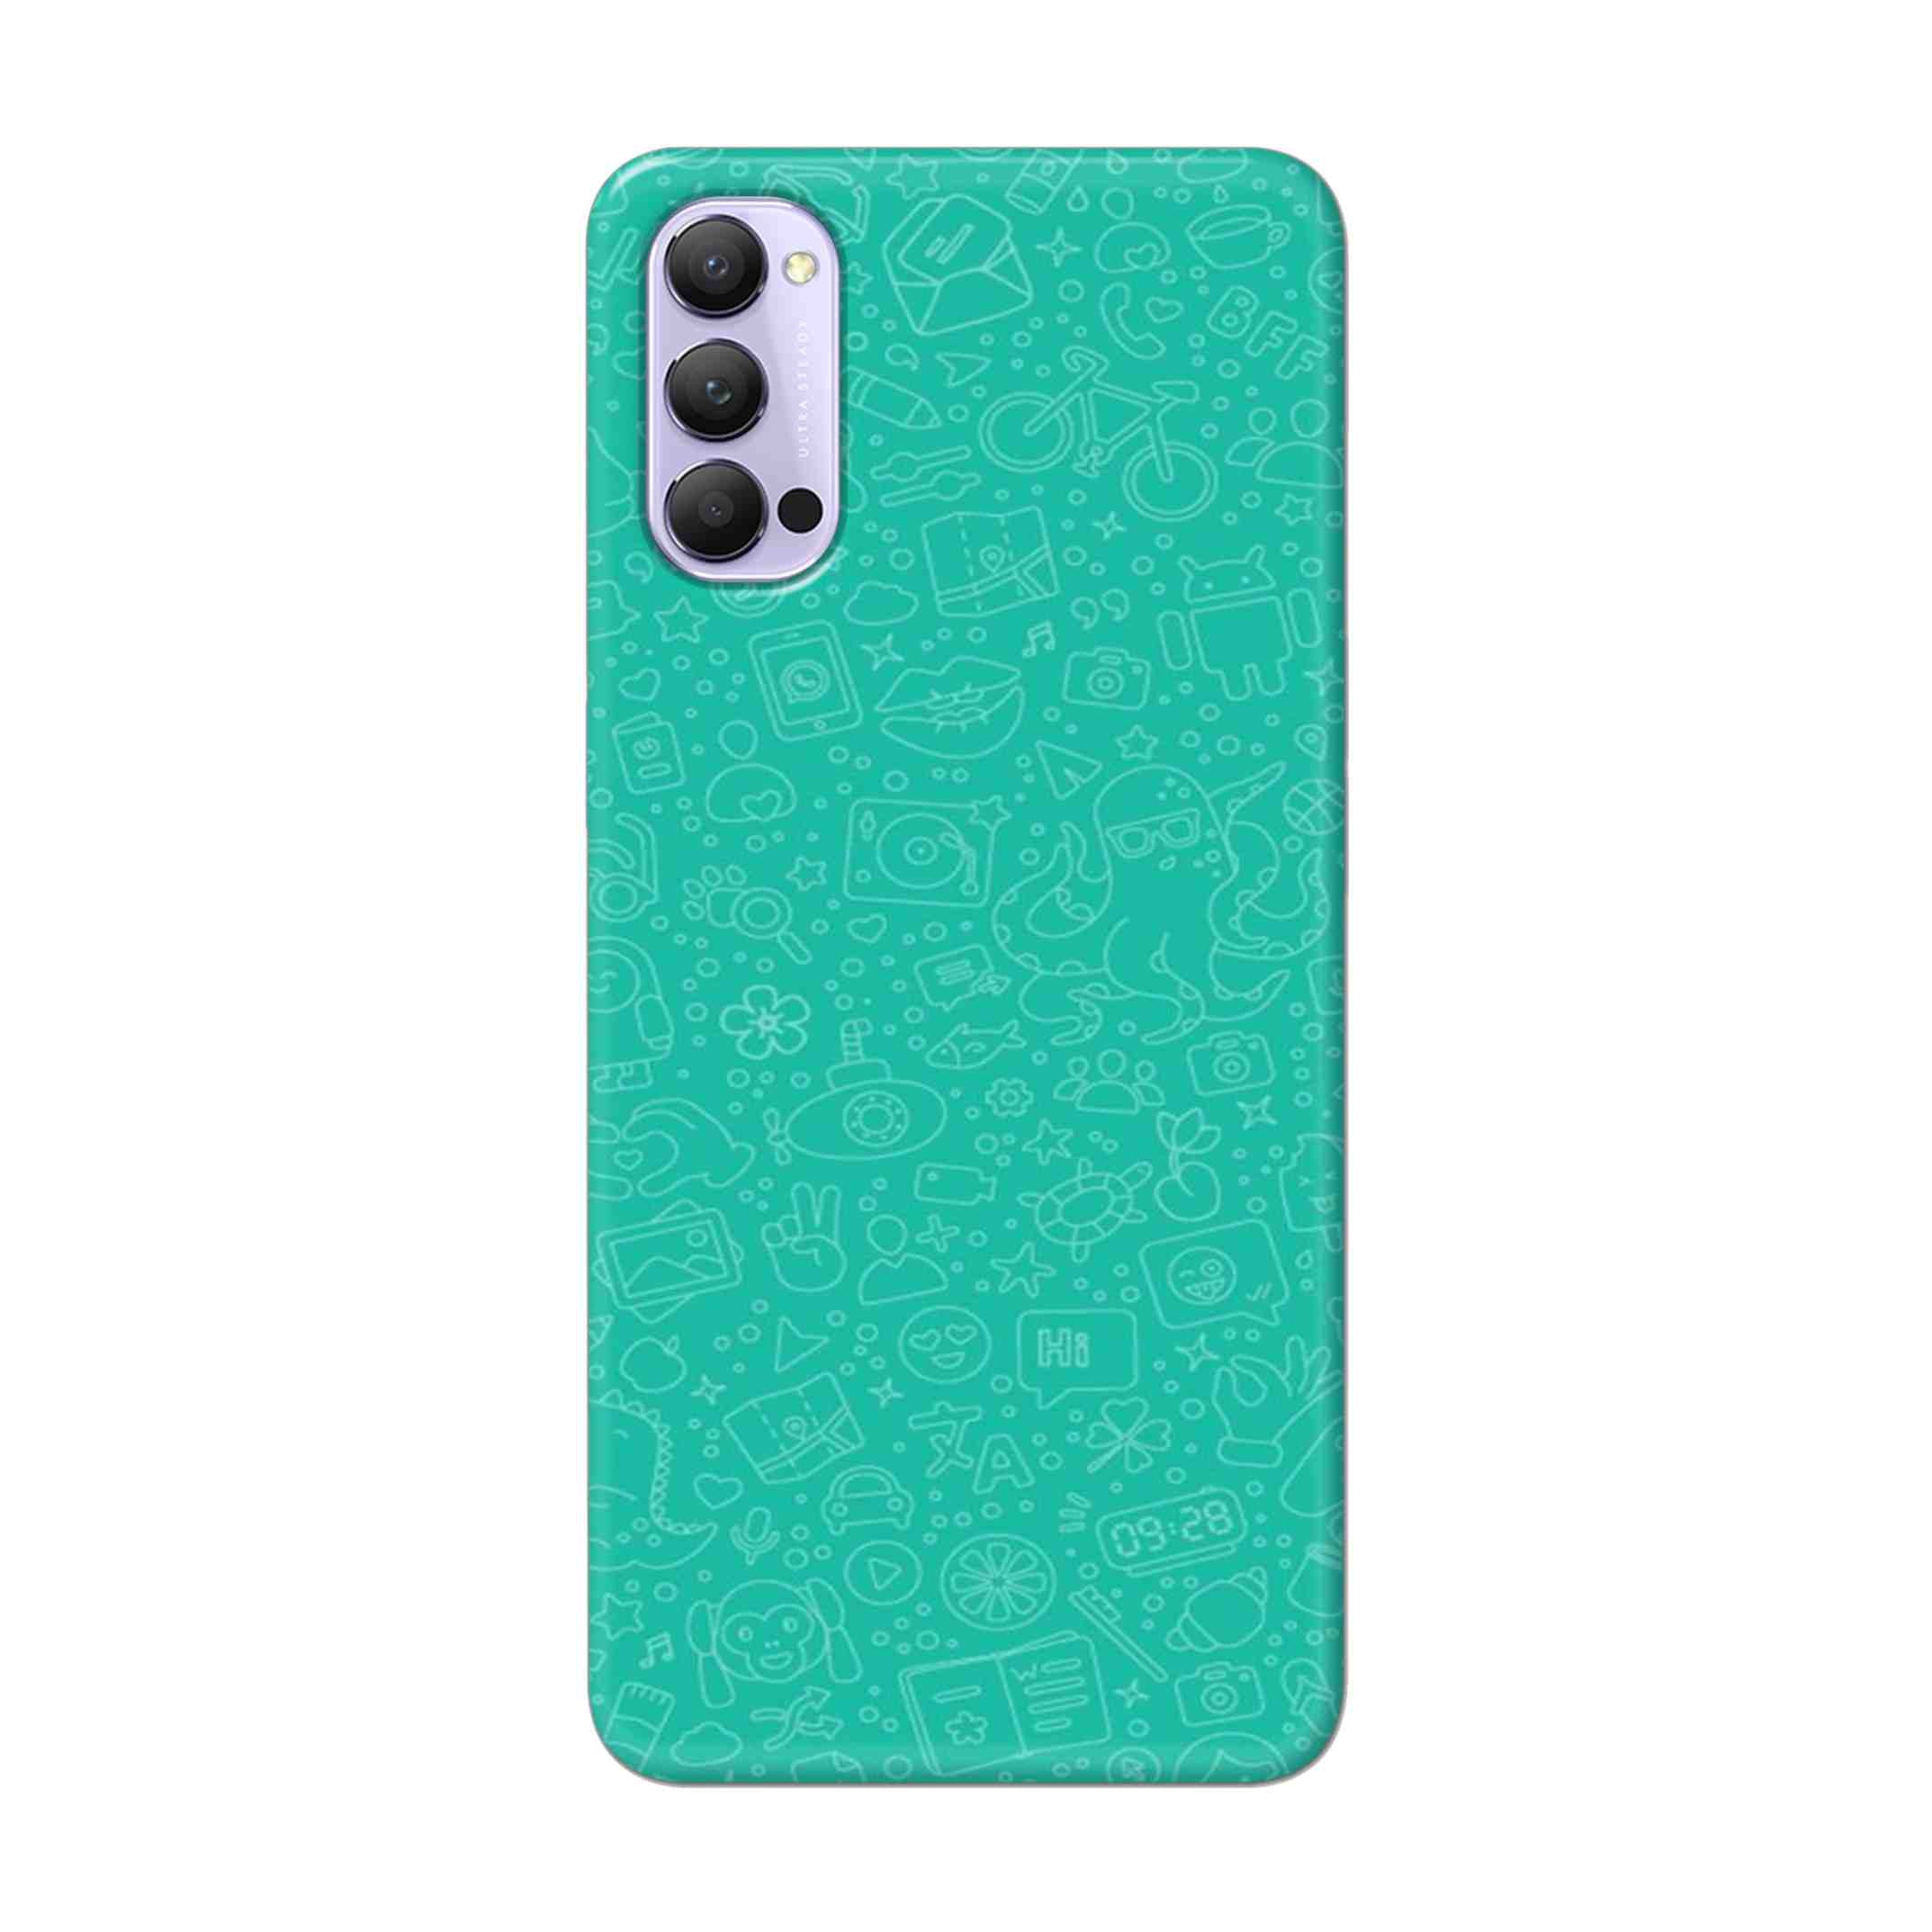 Buy Whatsapp Hard Back Mobile Phone Case Cover For Oppo Reno 4 Pro Online